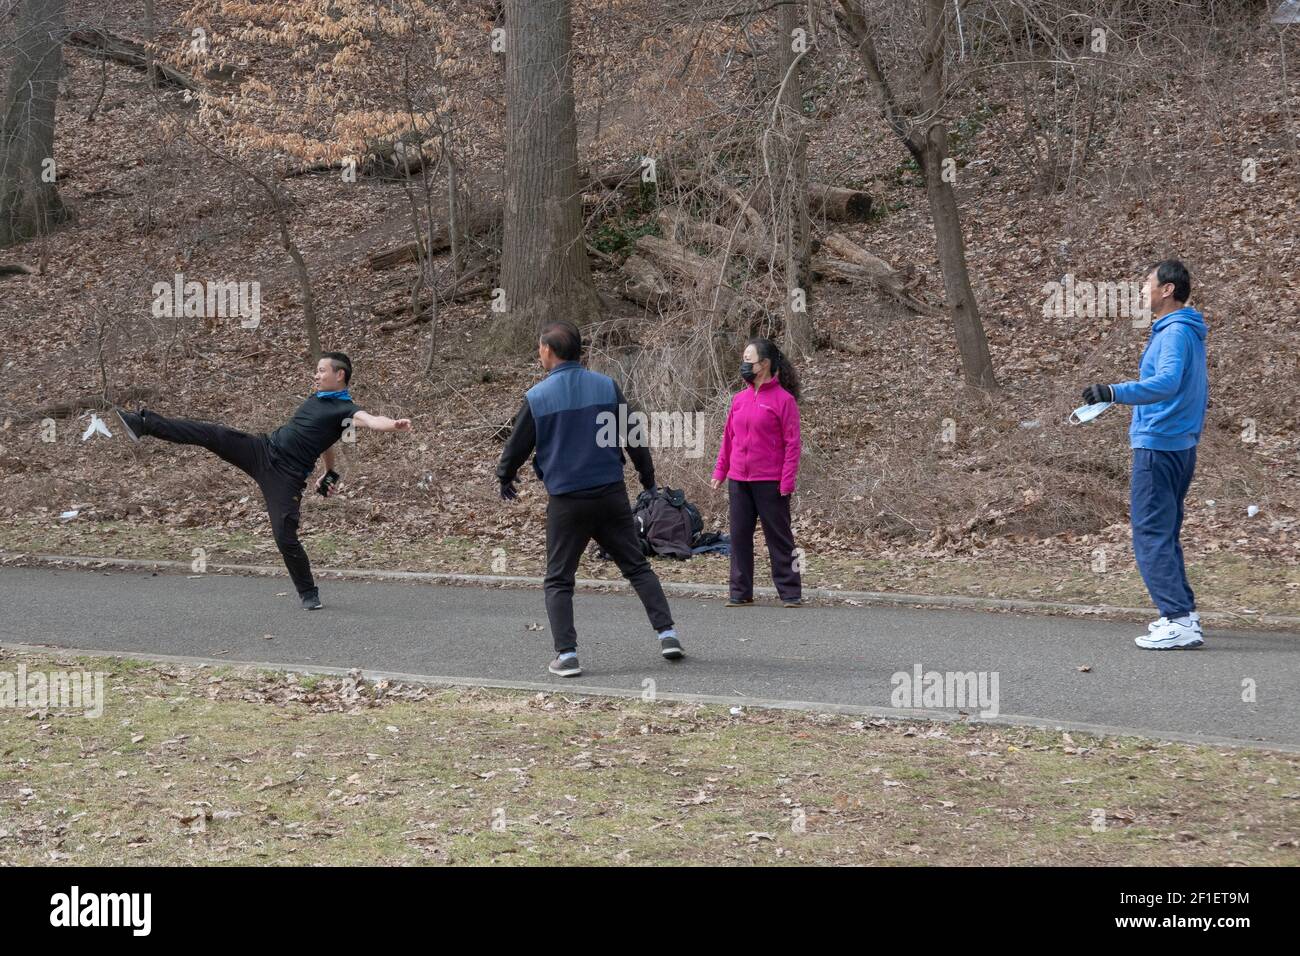 $ Chinese Americans - 3 men & a woman - play jianzi in a park in Queens, New York City. Stock Photo